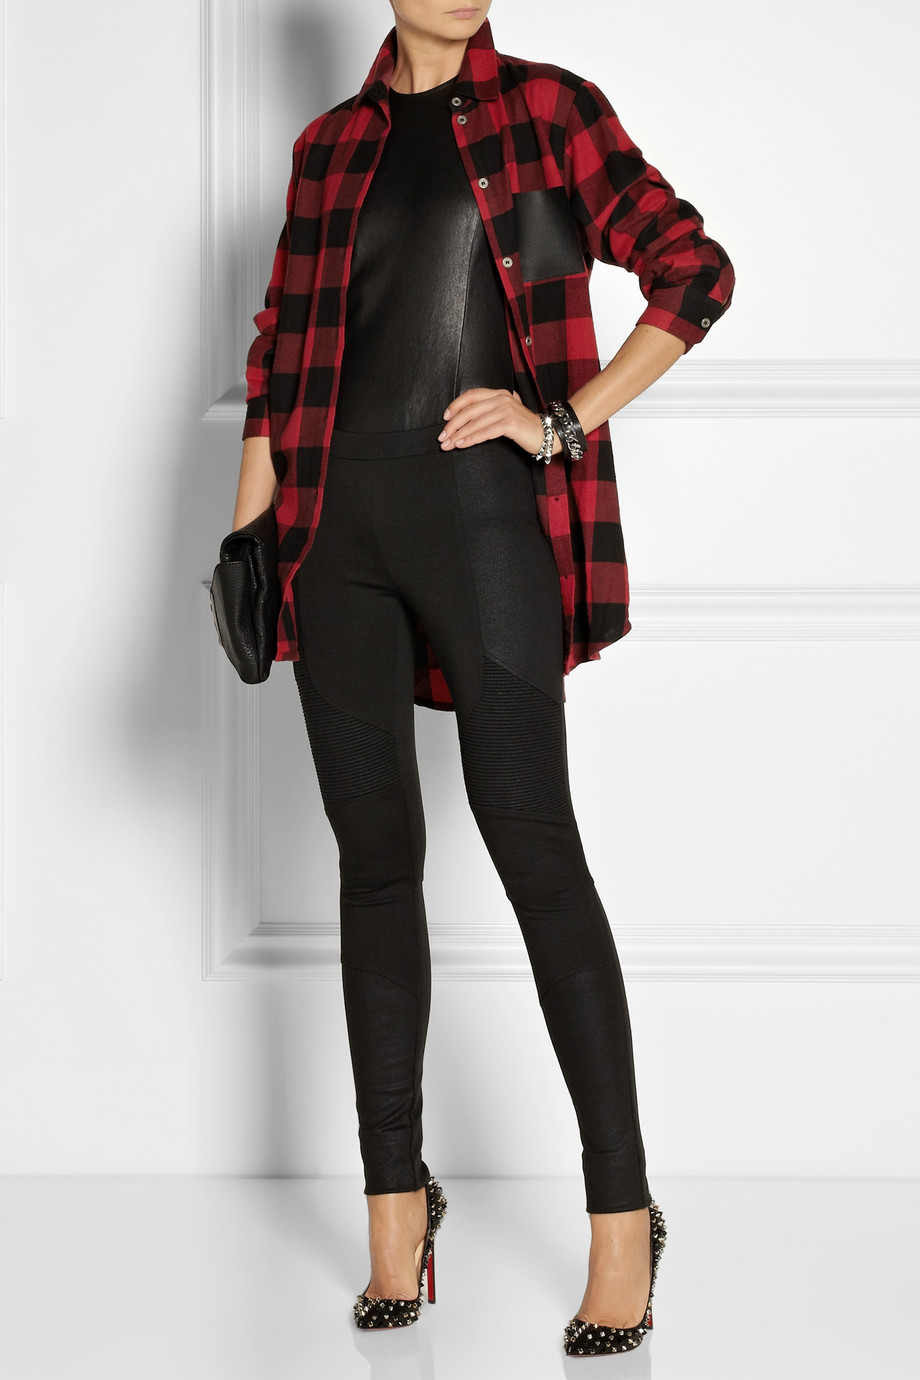 Lyst - Maje Degriffe Oversized Plaid Cotton Shirt in Red